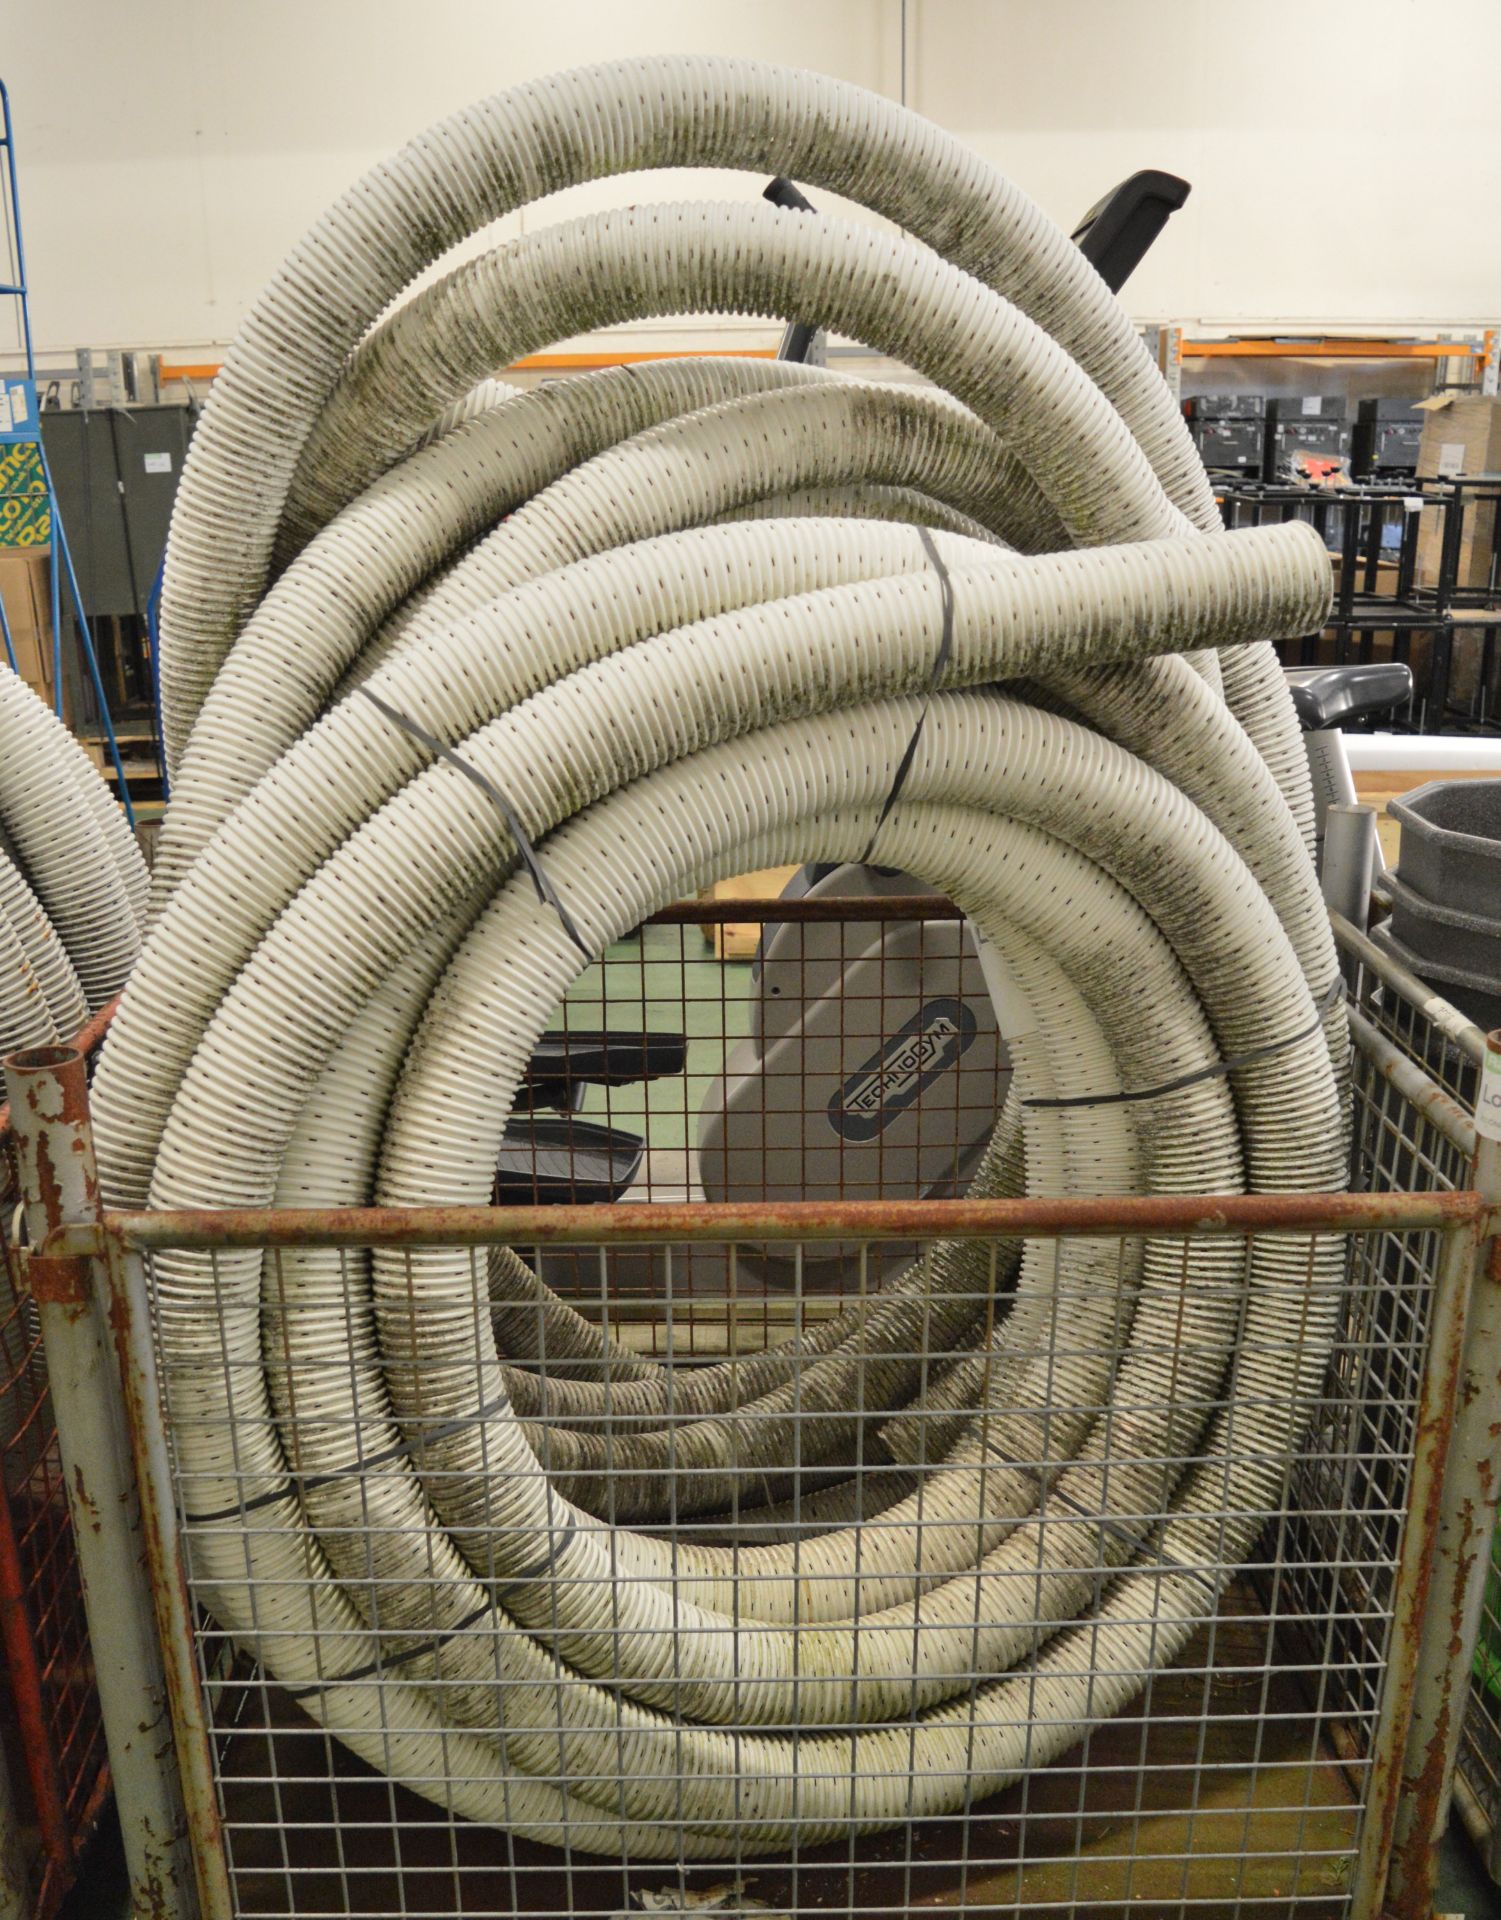 2x Coils Perforated Drainage Pipe - approx 65 ft long x 100 mm diameter